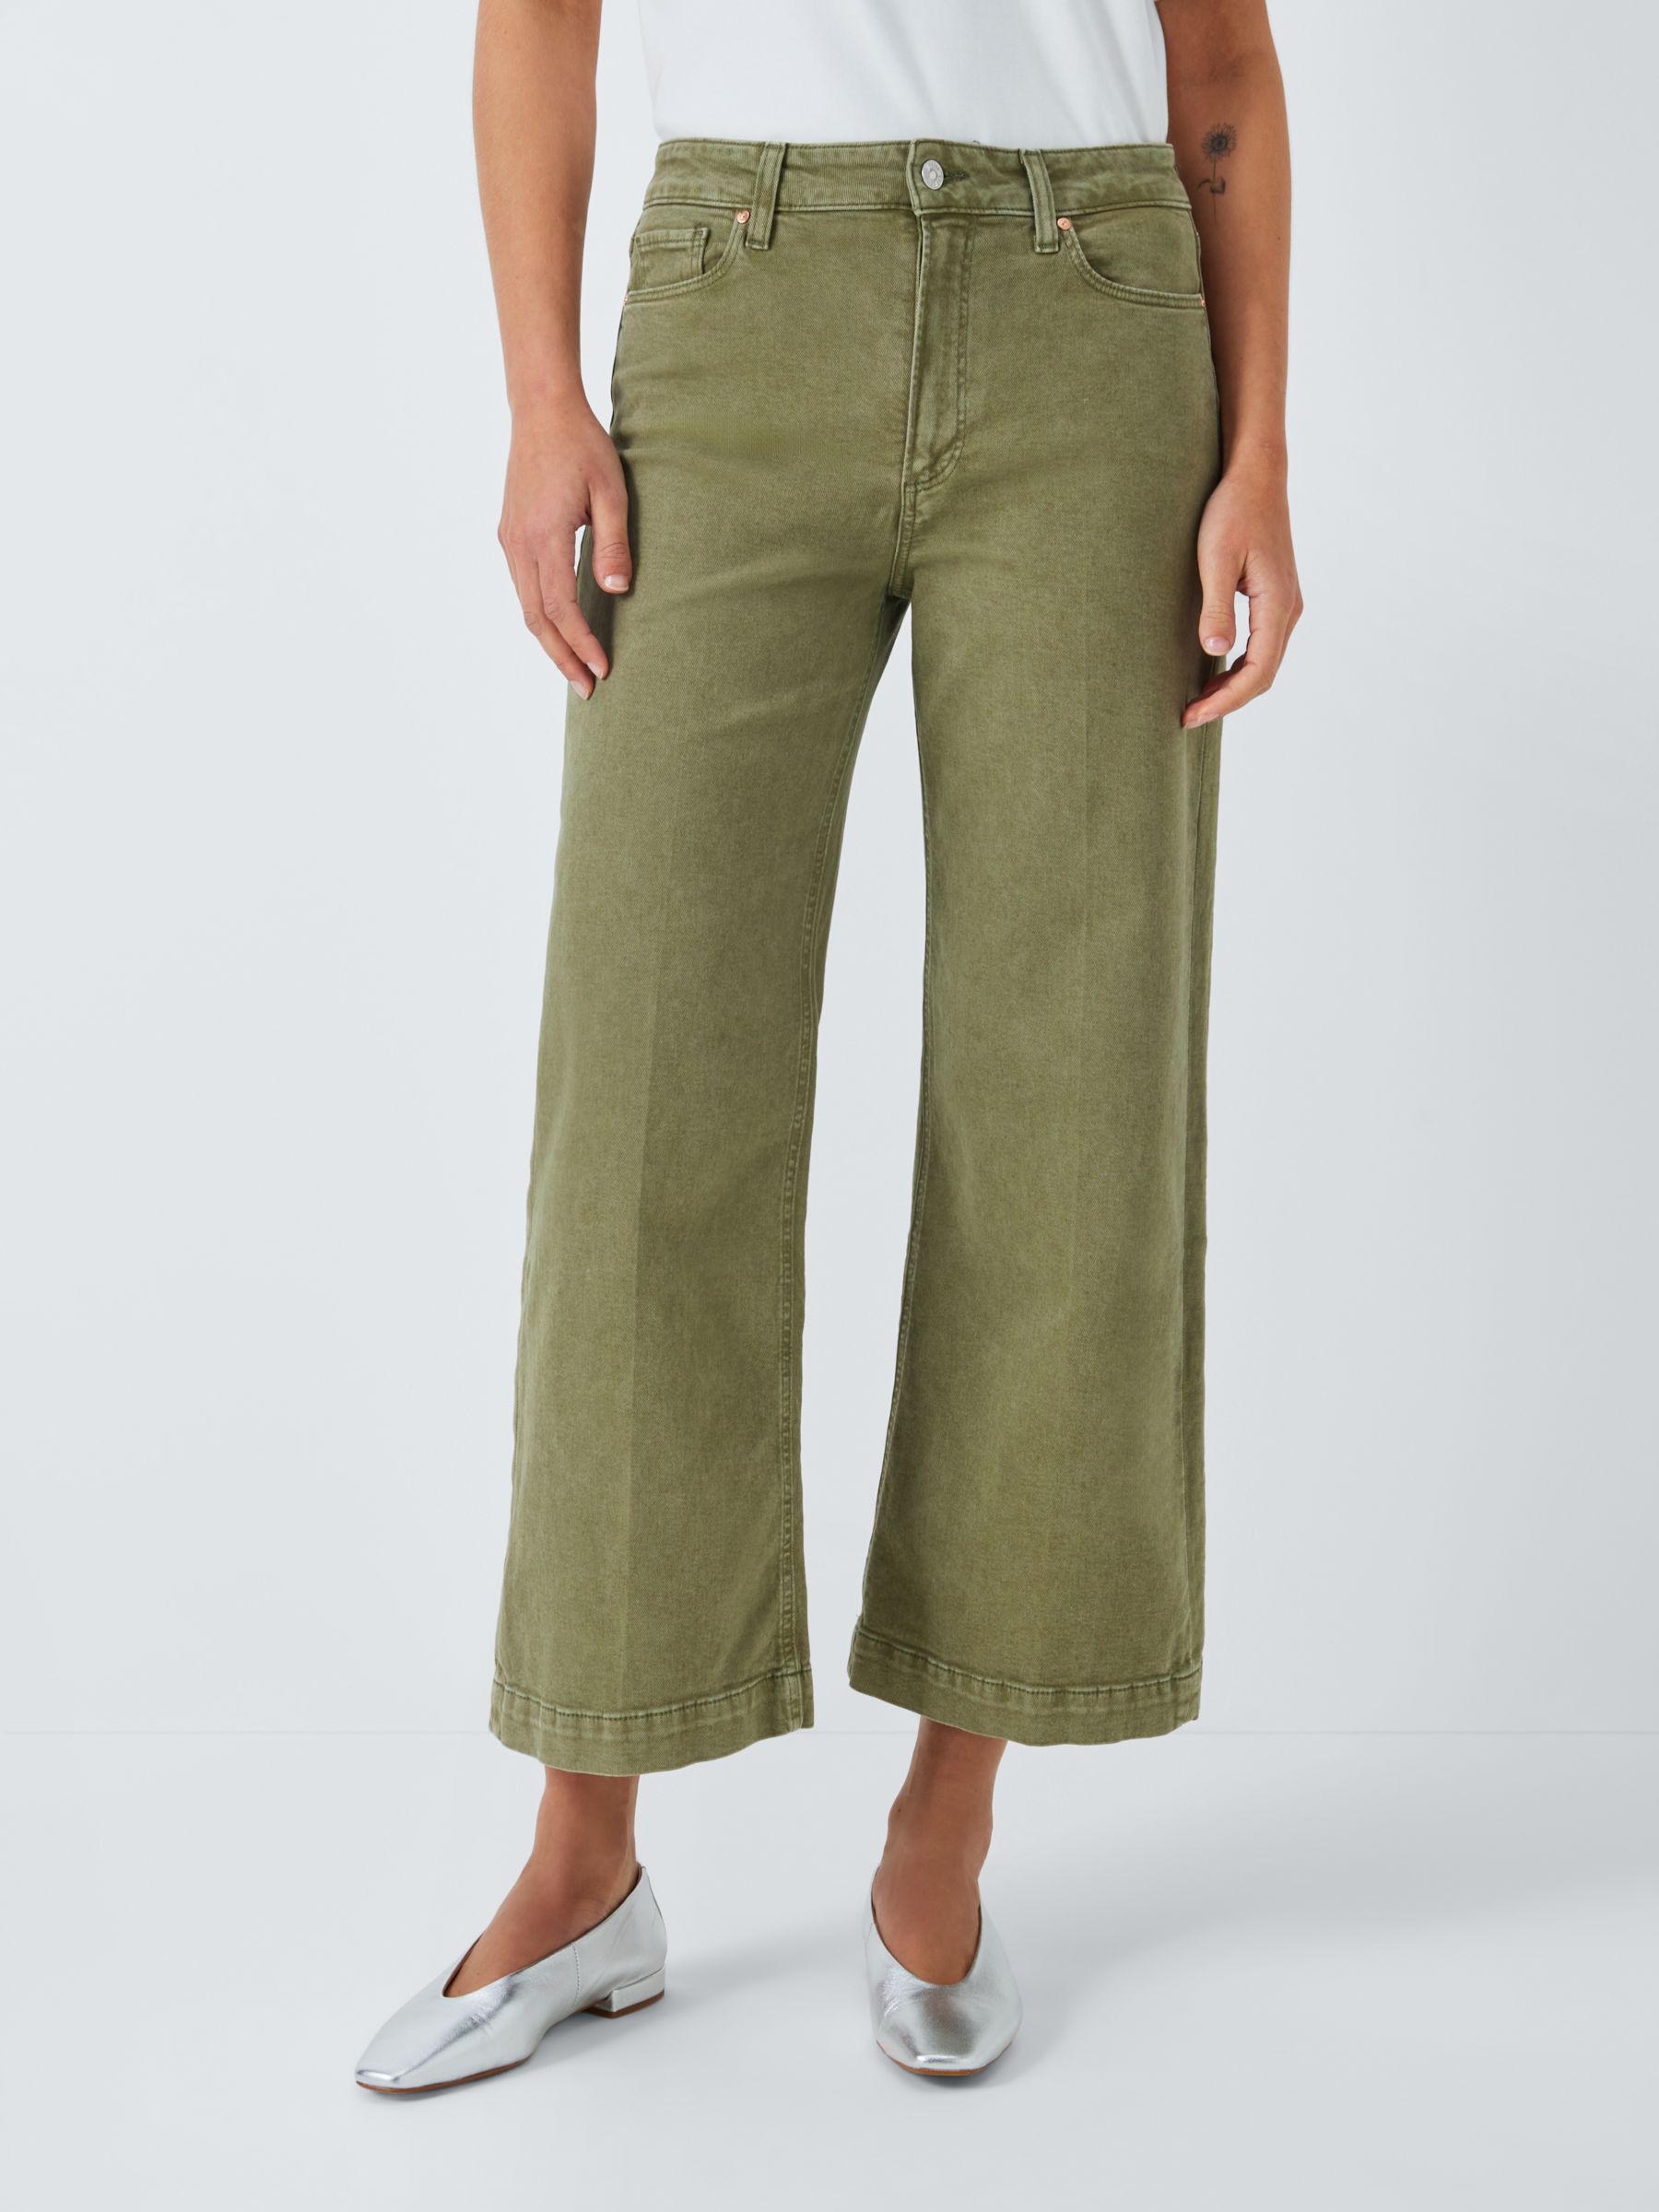 PAIGE Anessa Wide Leg Ankle Jeans, Vintage Mossy Green, 24